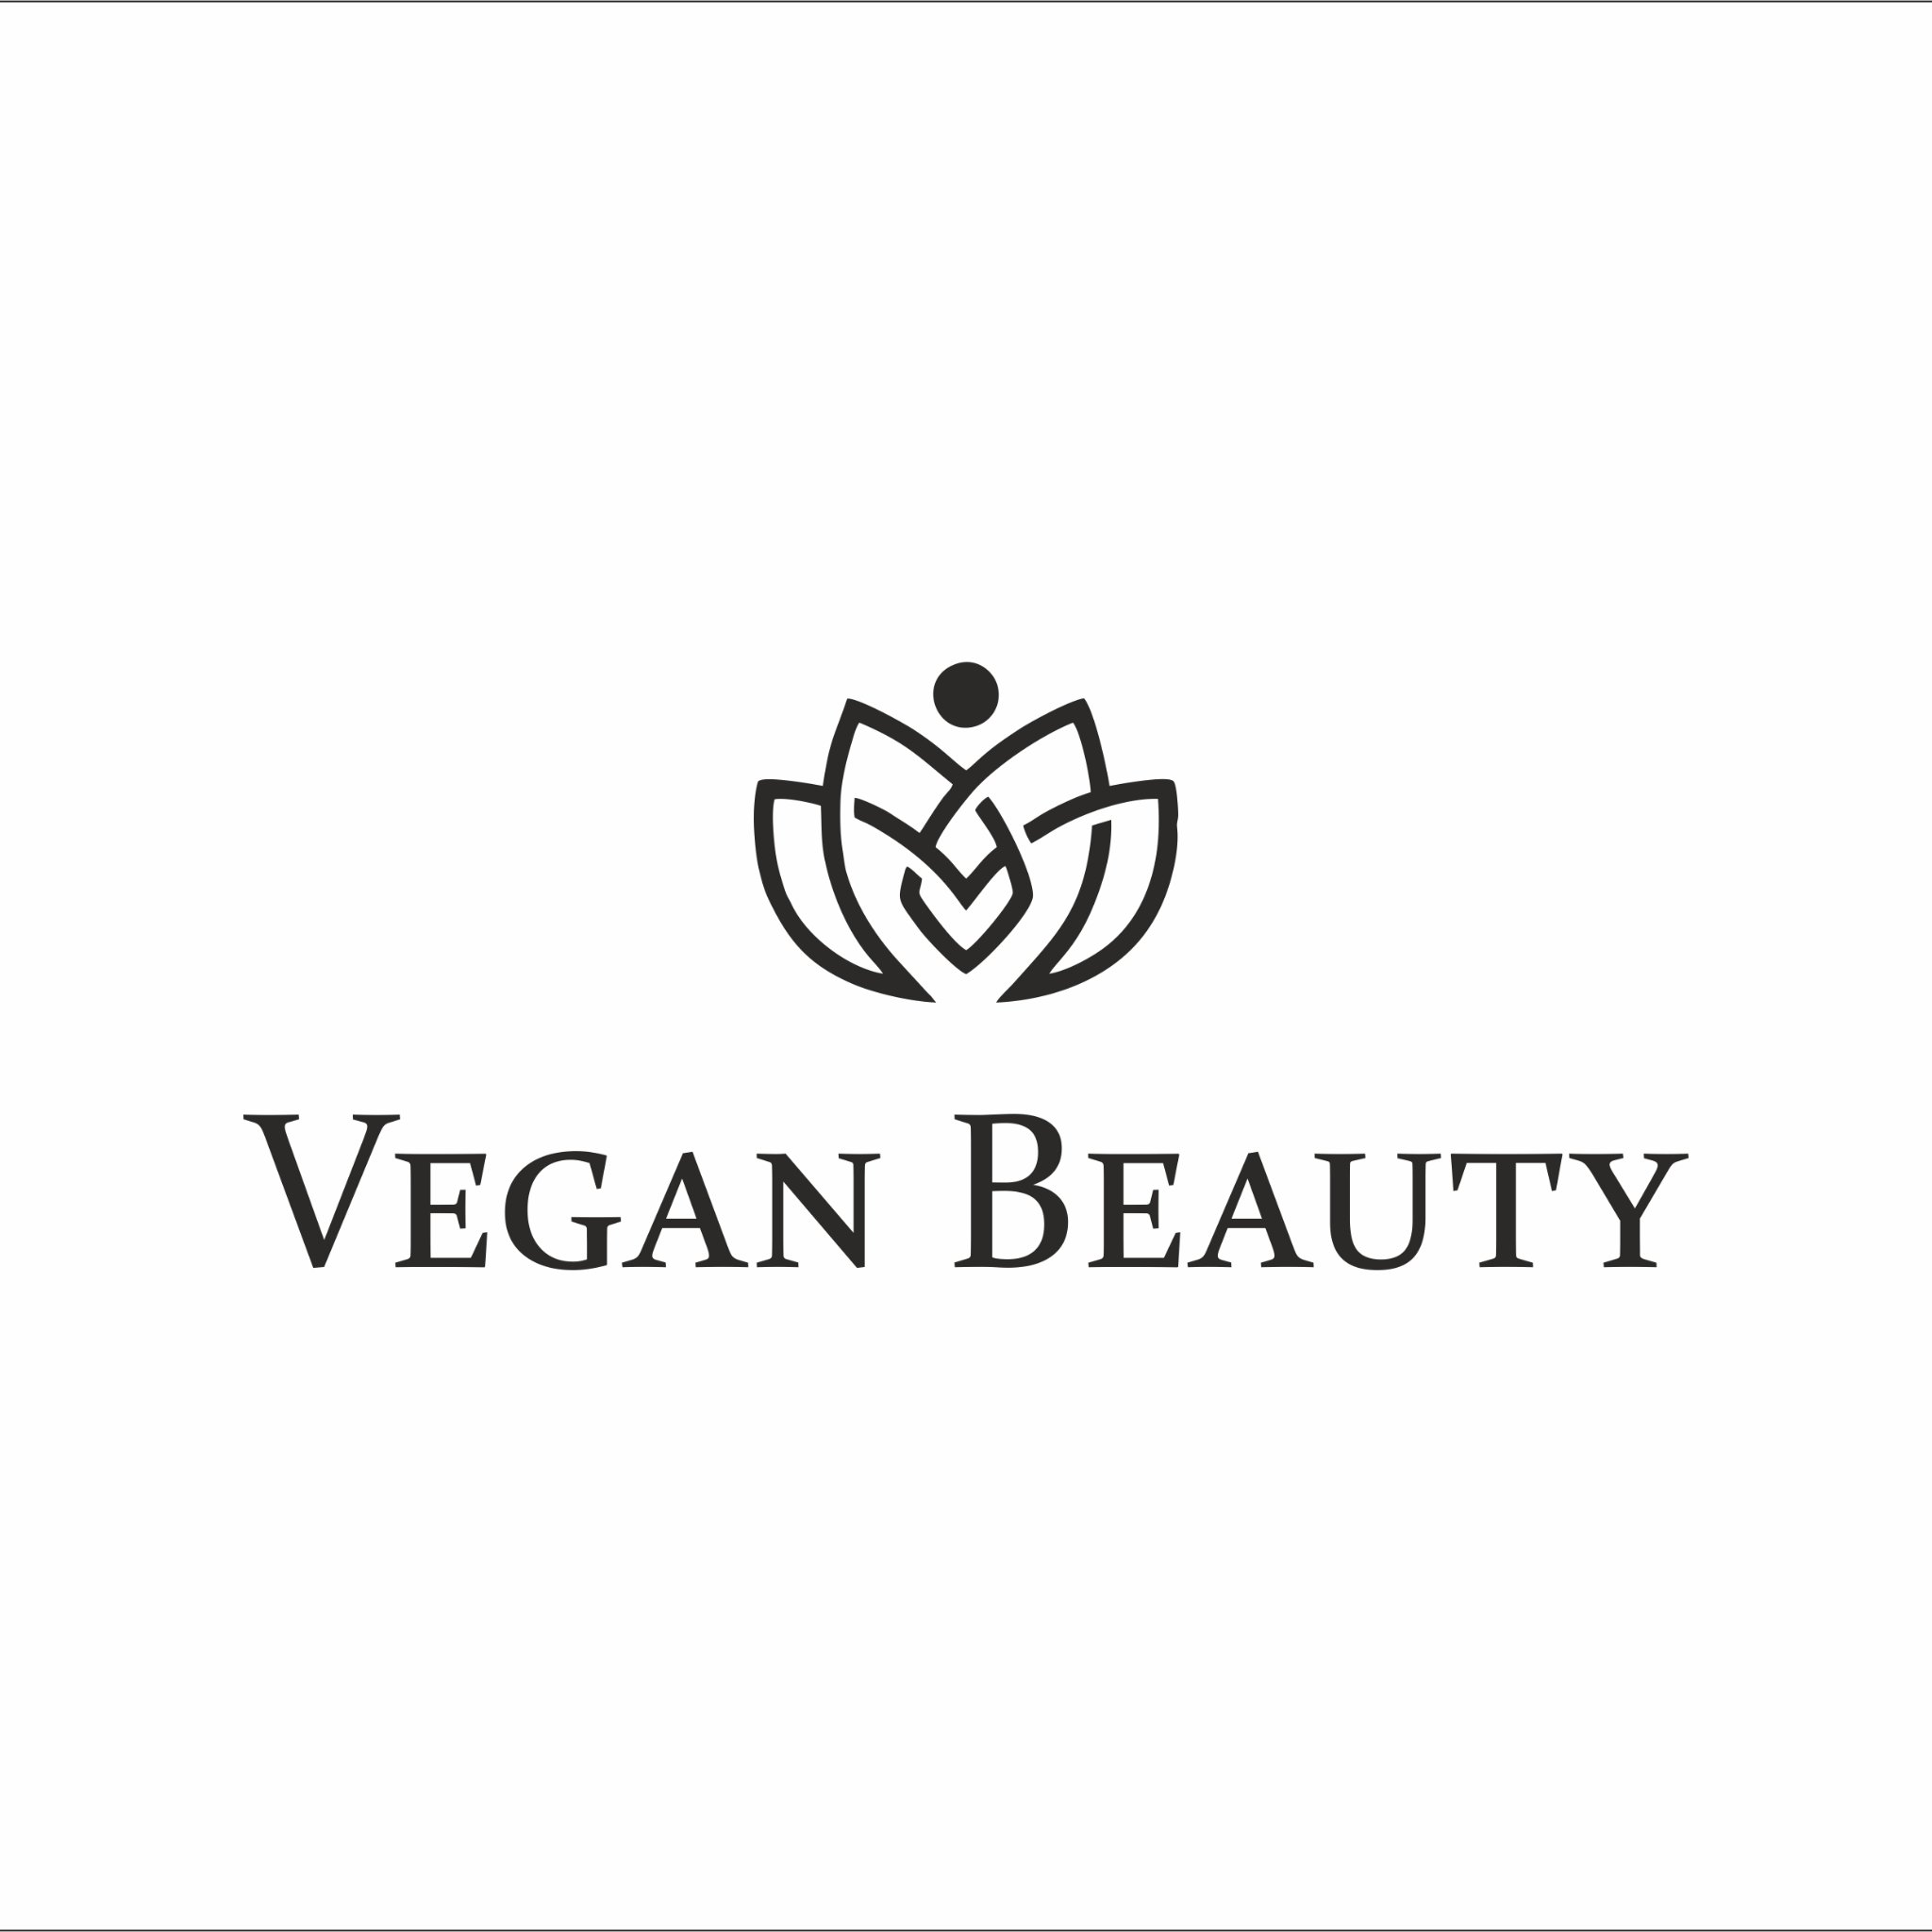 We are a group of enthusiasts dedicated to bring Vegan and Natural skin care products made using materials acquired keeping the care for animals & nature first.